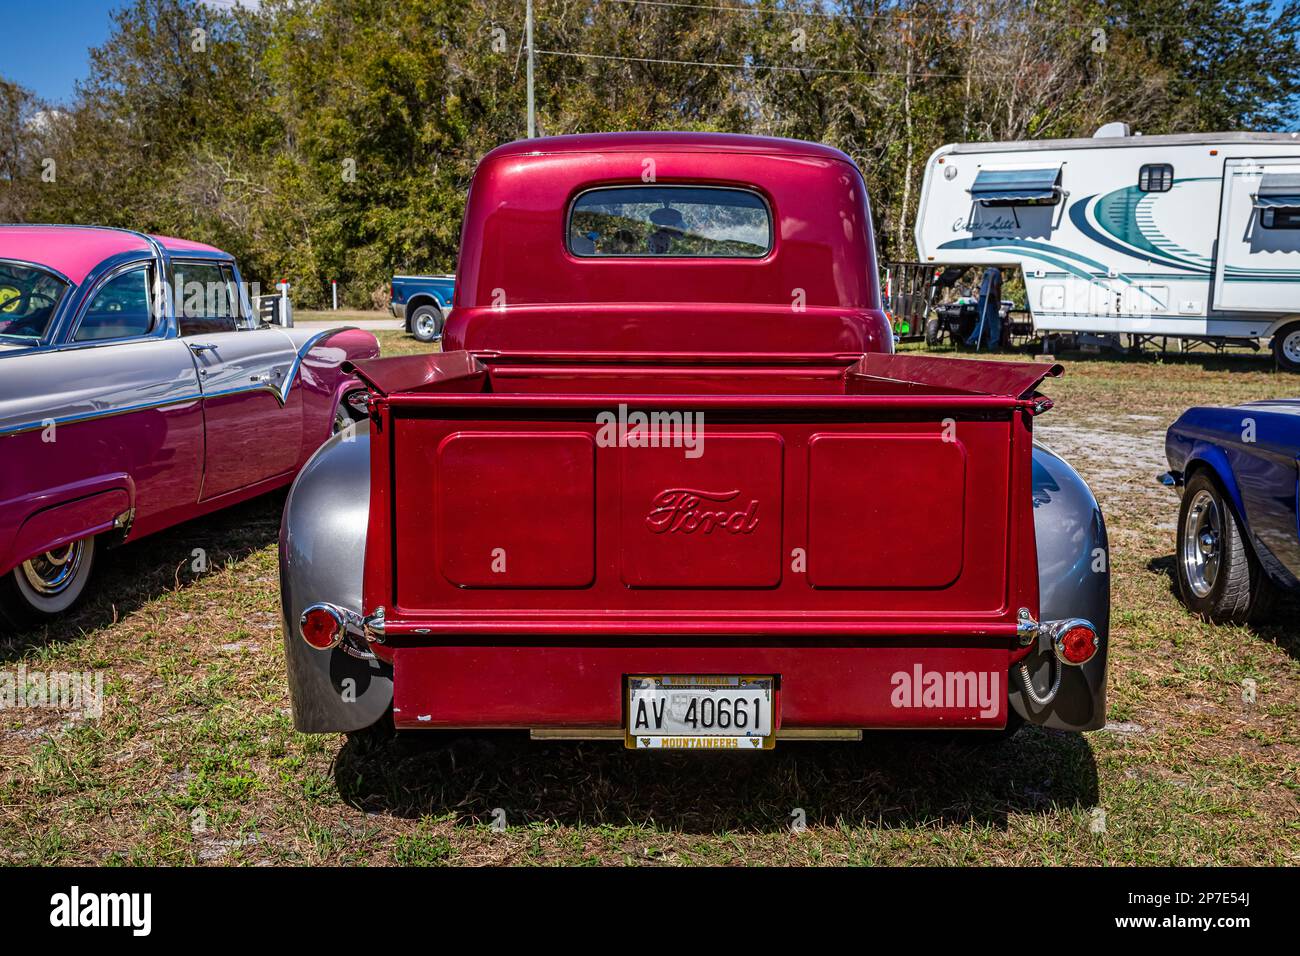 Fort Meade, FL - February 24, 2022: High perspective rear view of a 1948 Ford F1 Pickup Truck at a local car show. Stock Photo